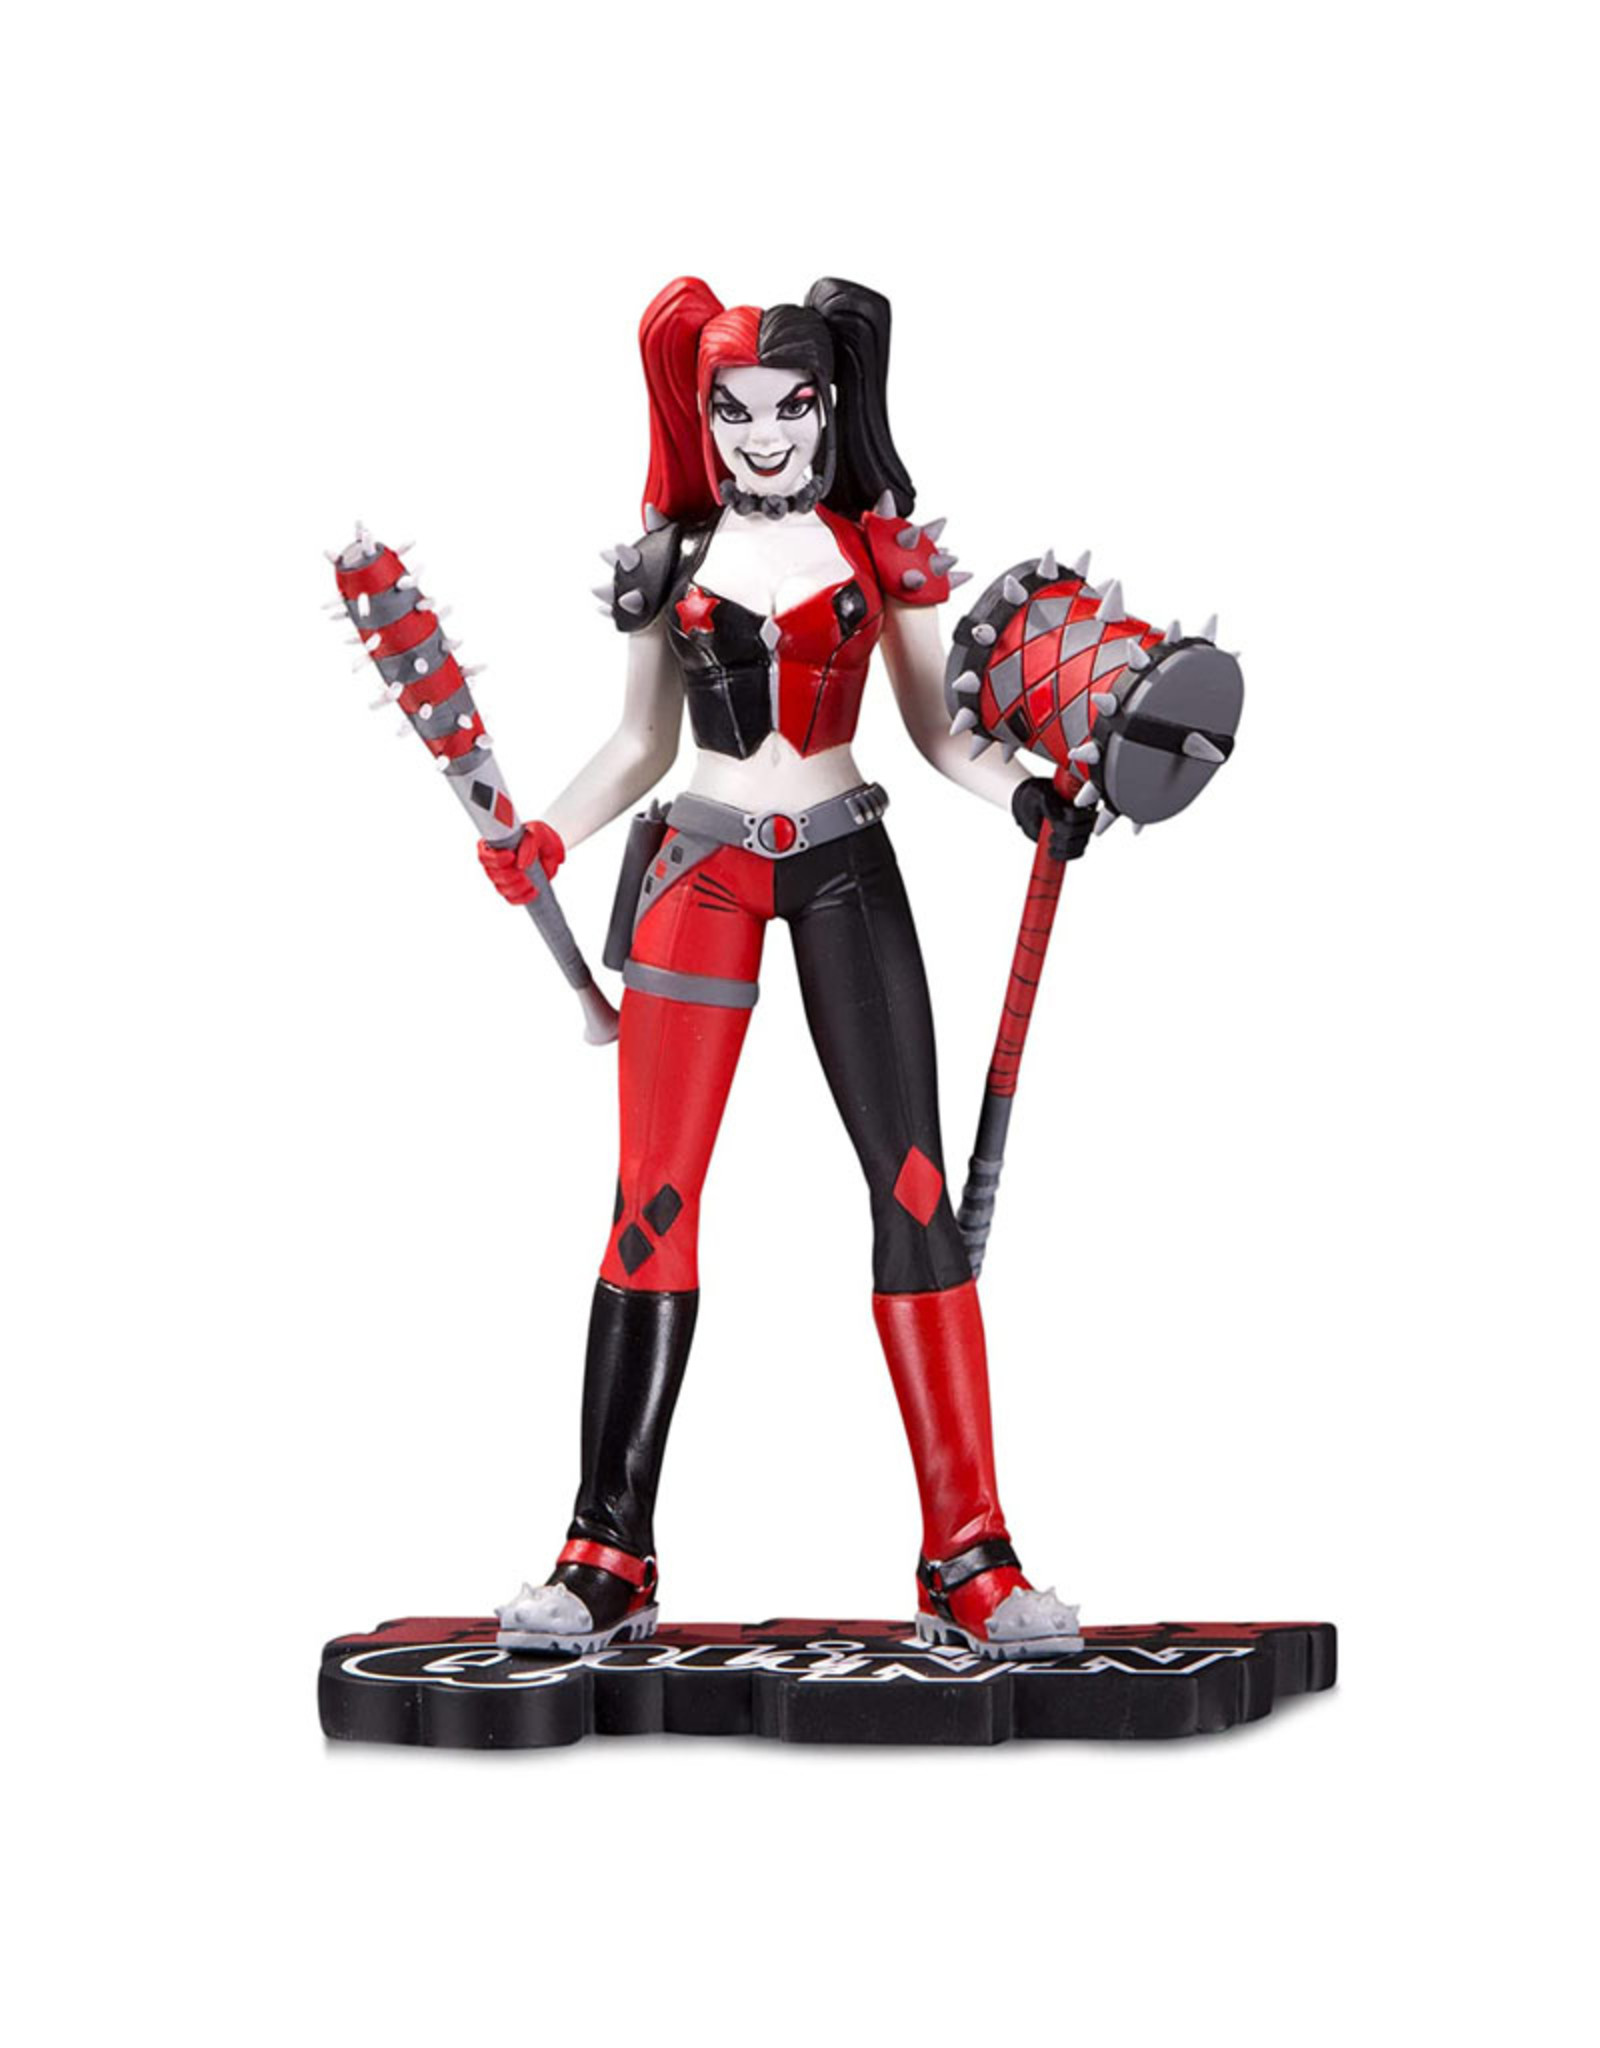 DC Comics Harley Quinn Red, White, & Black Statue by Amanda Conner